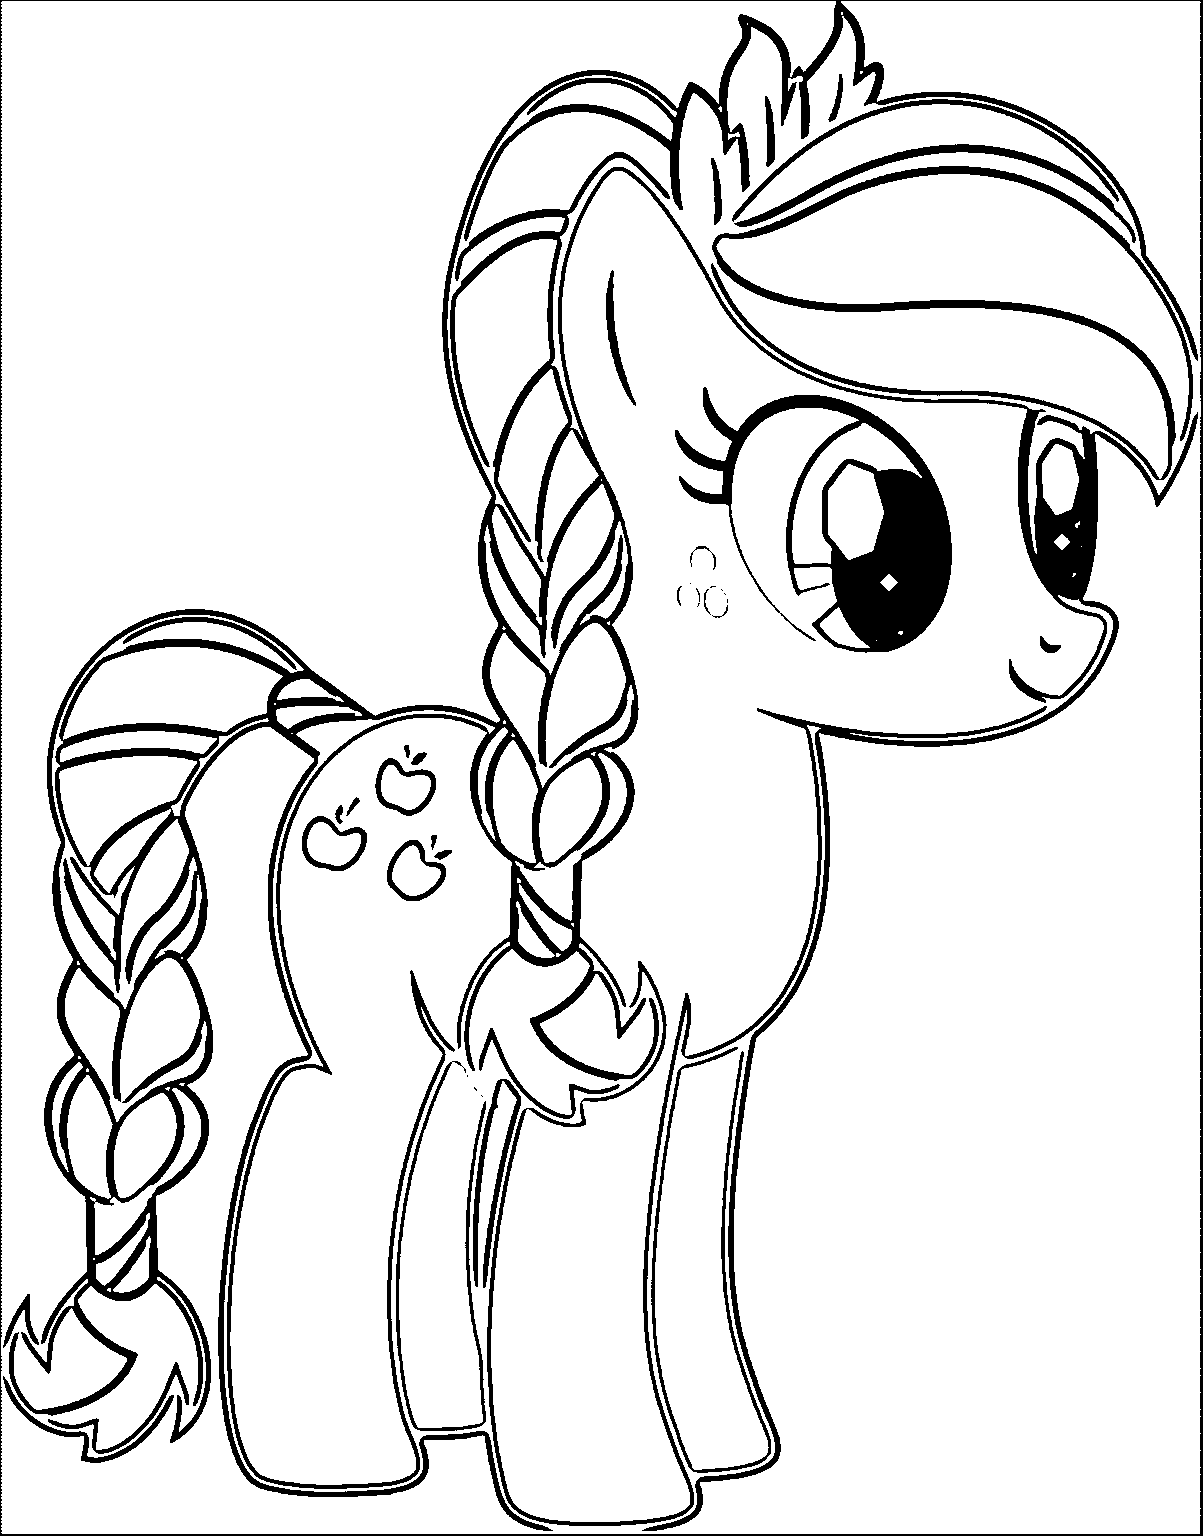 Pony Cartoon My Little Pony Coloring Pages | Wecoloringpage